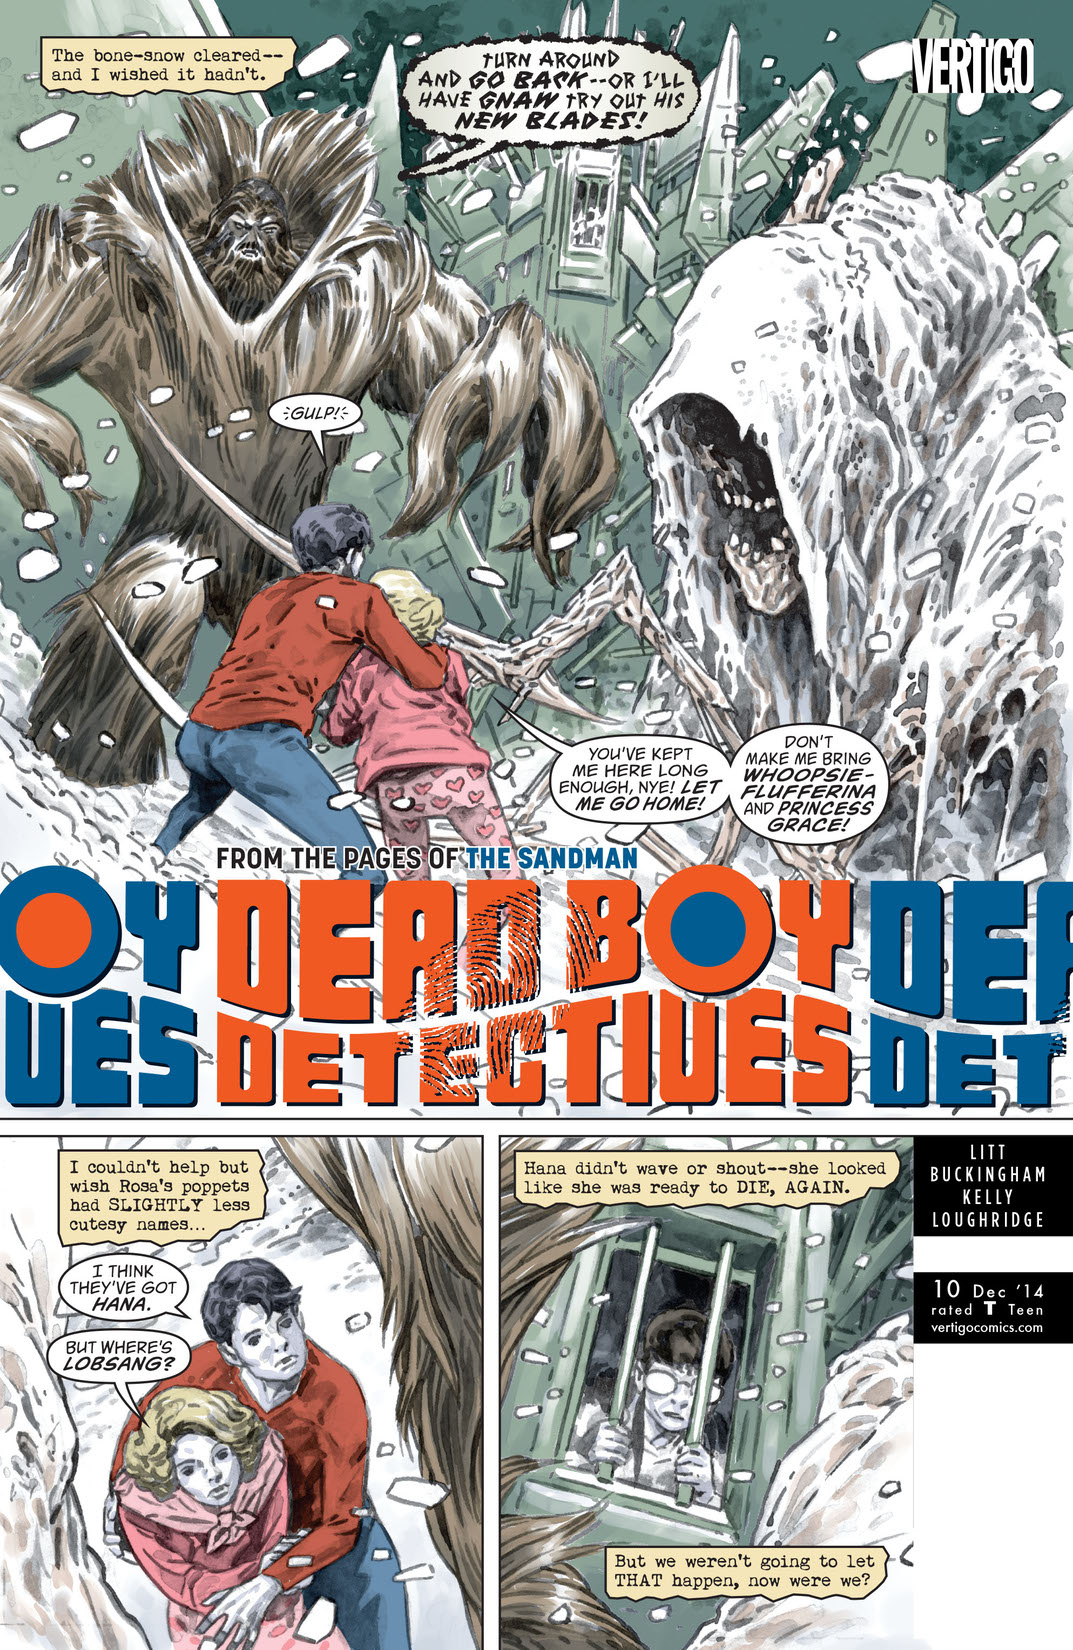 The Dead Boy Detectives #10 preview images